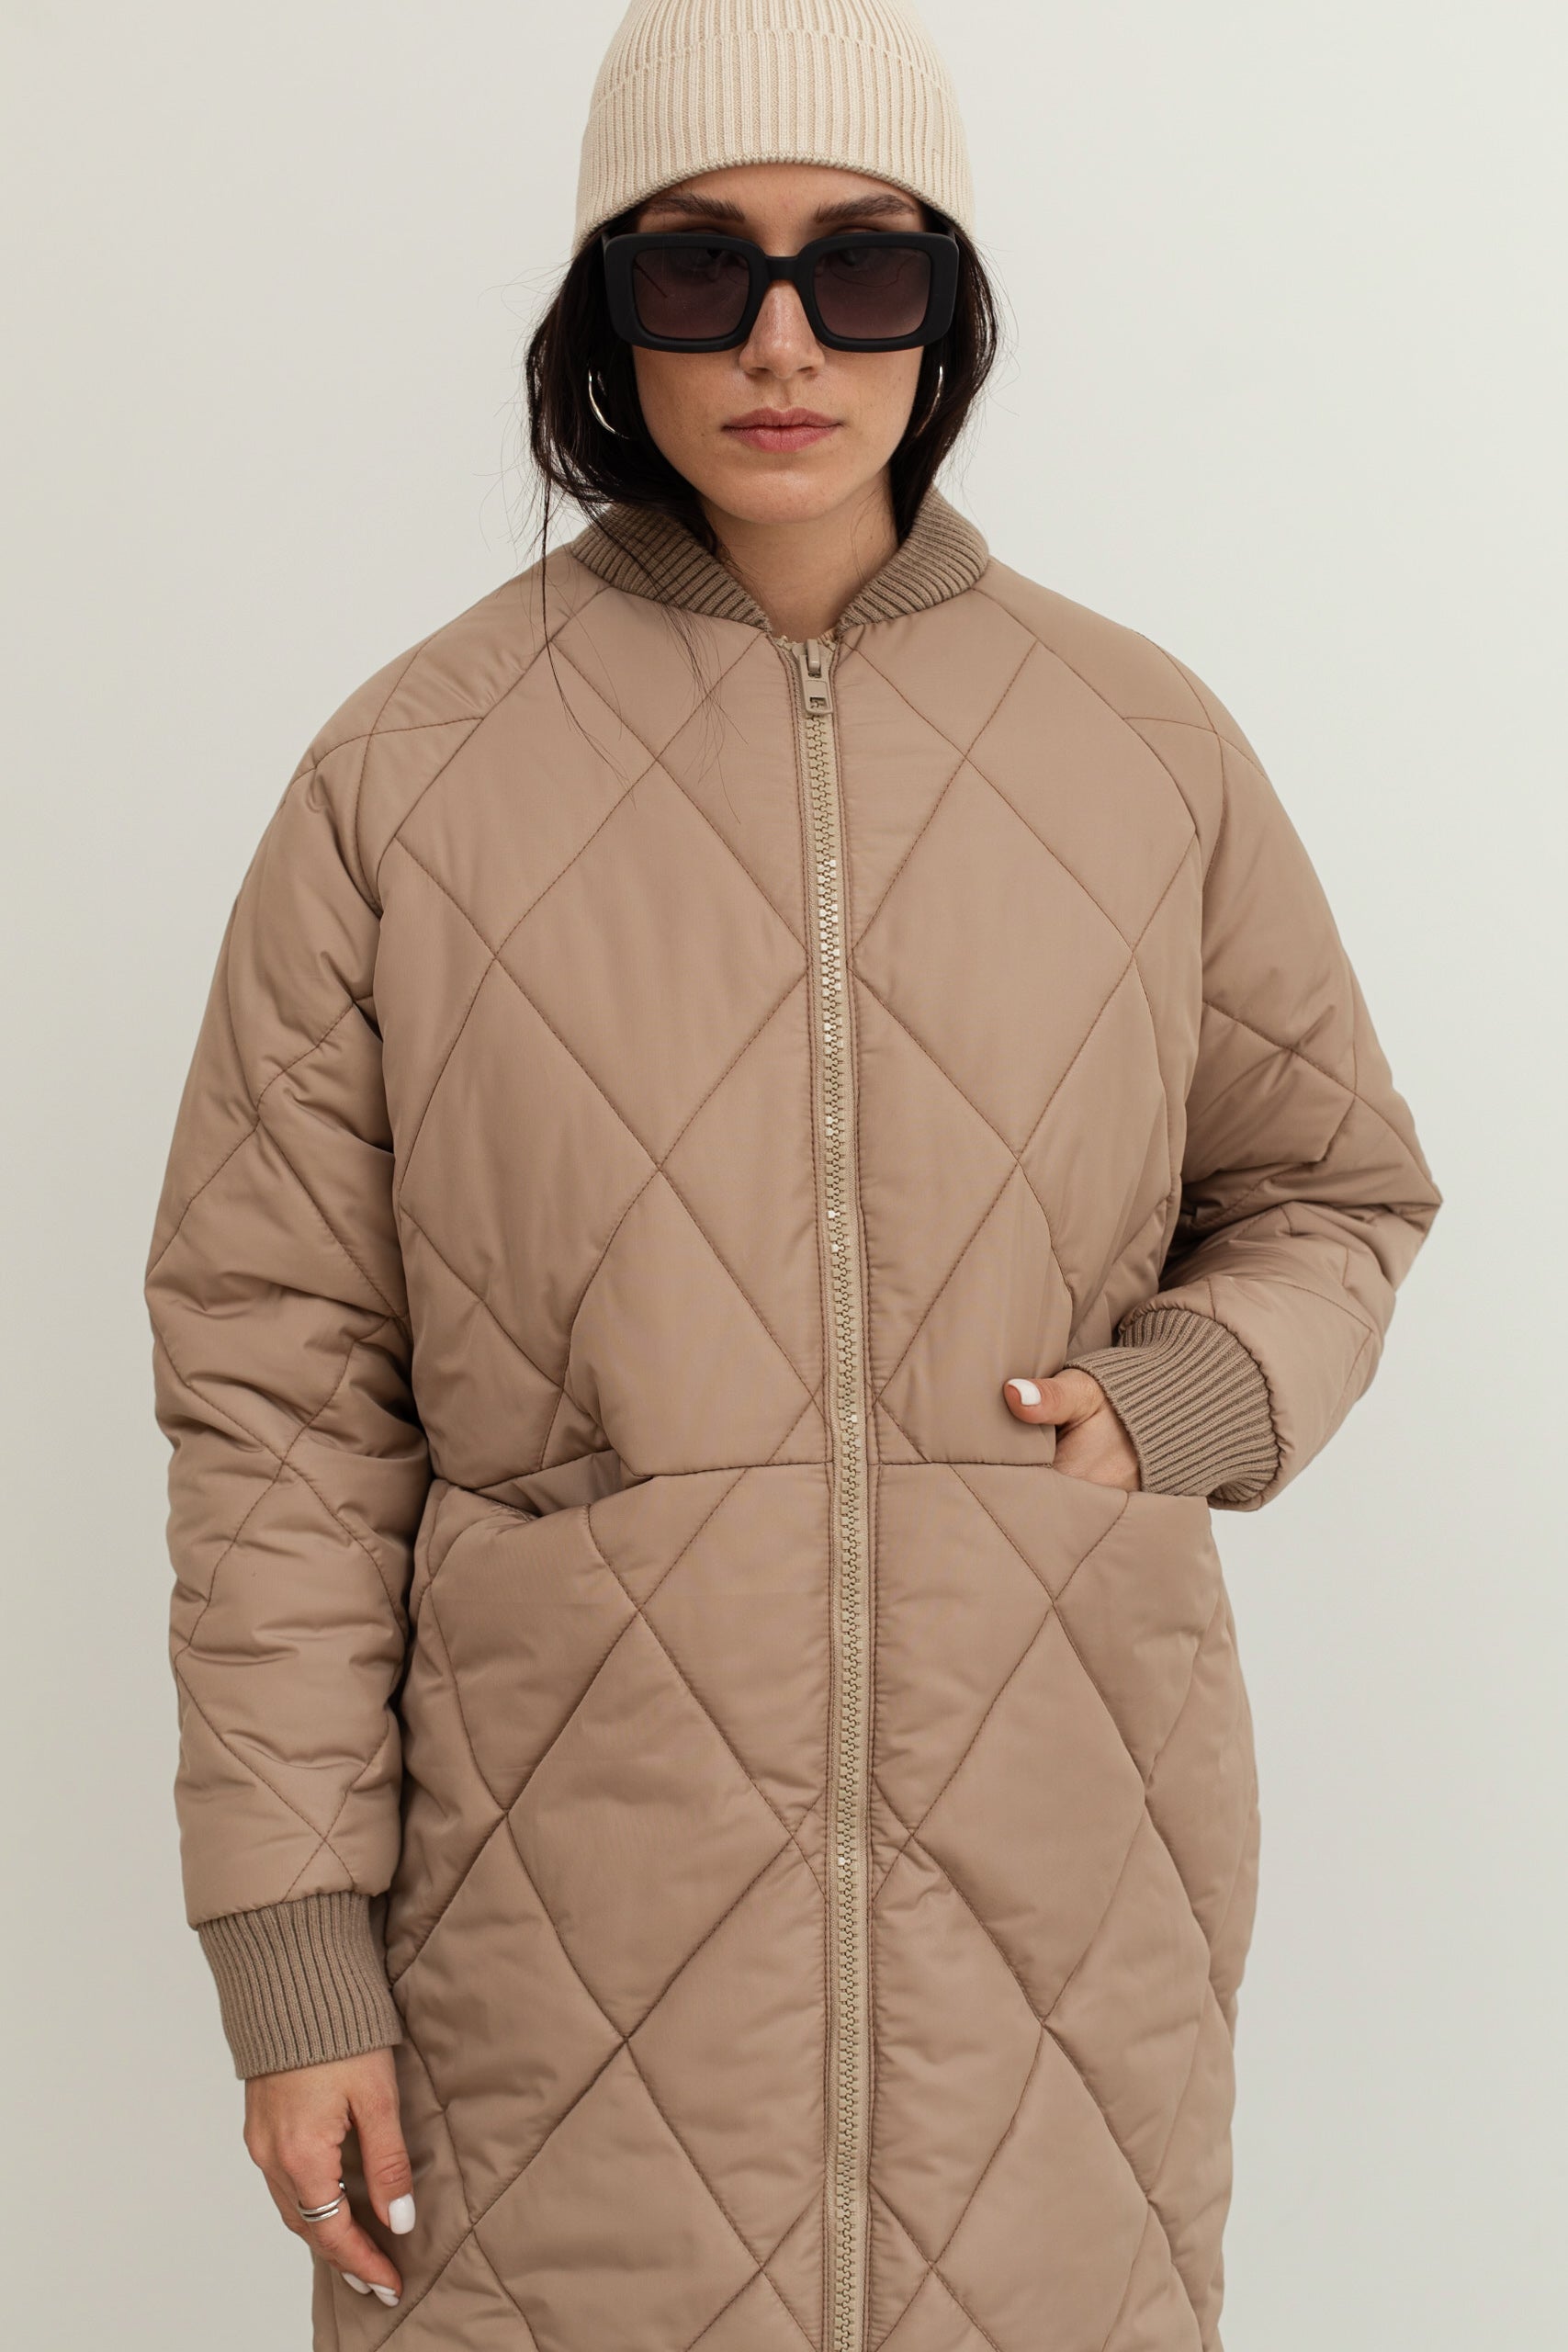 Hugue sand quilted jacket